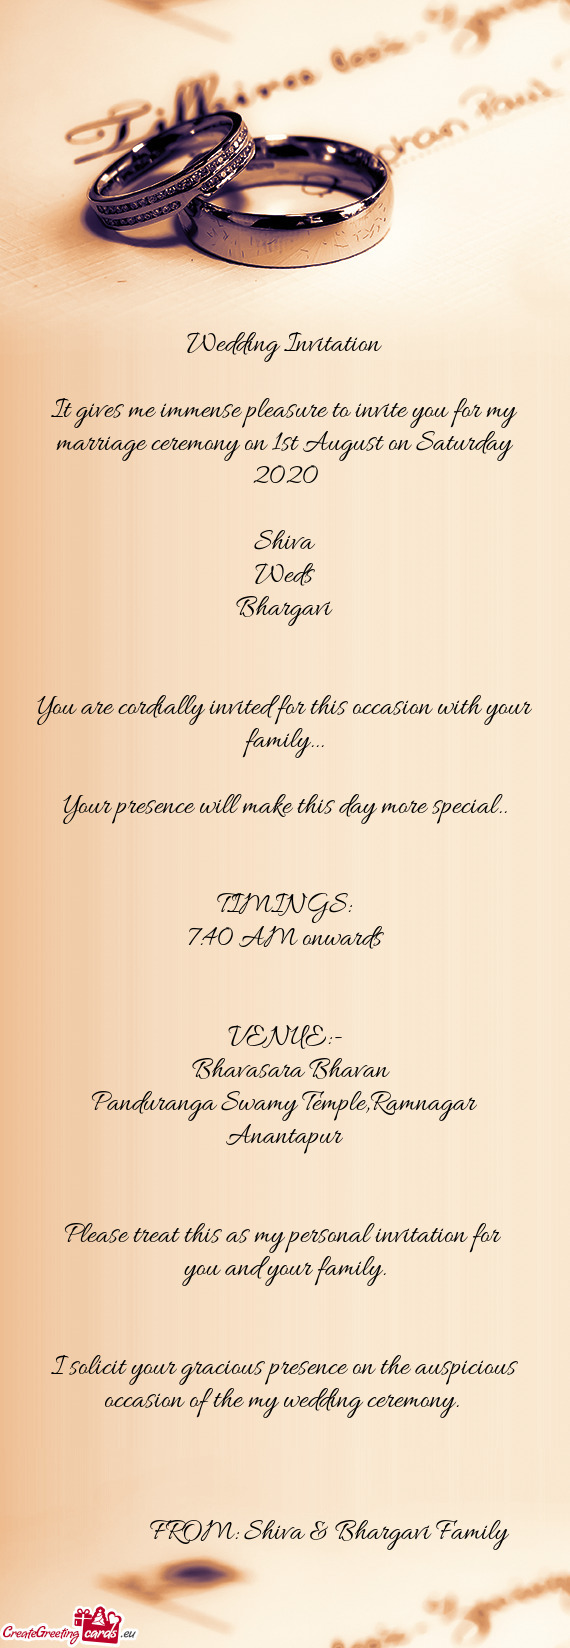 It gives me immense pleasure to invite you for my marriage ceremony on 1st August on Saturday 2020